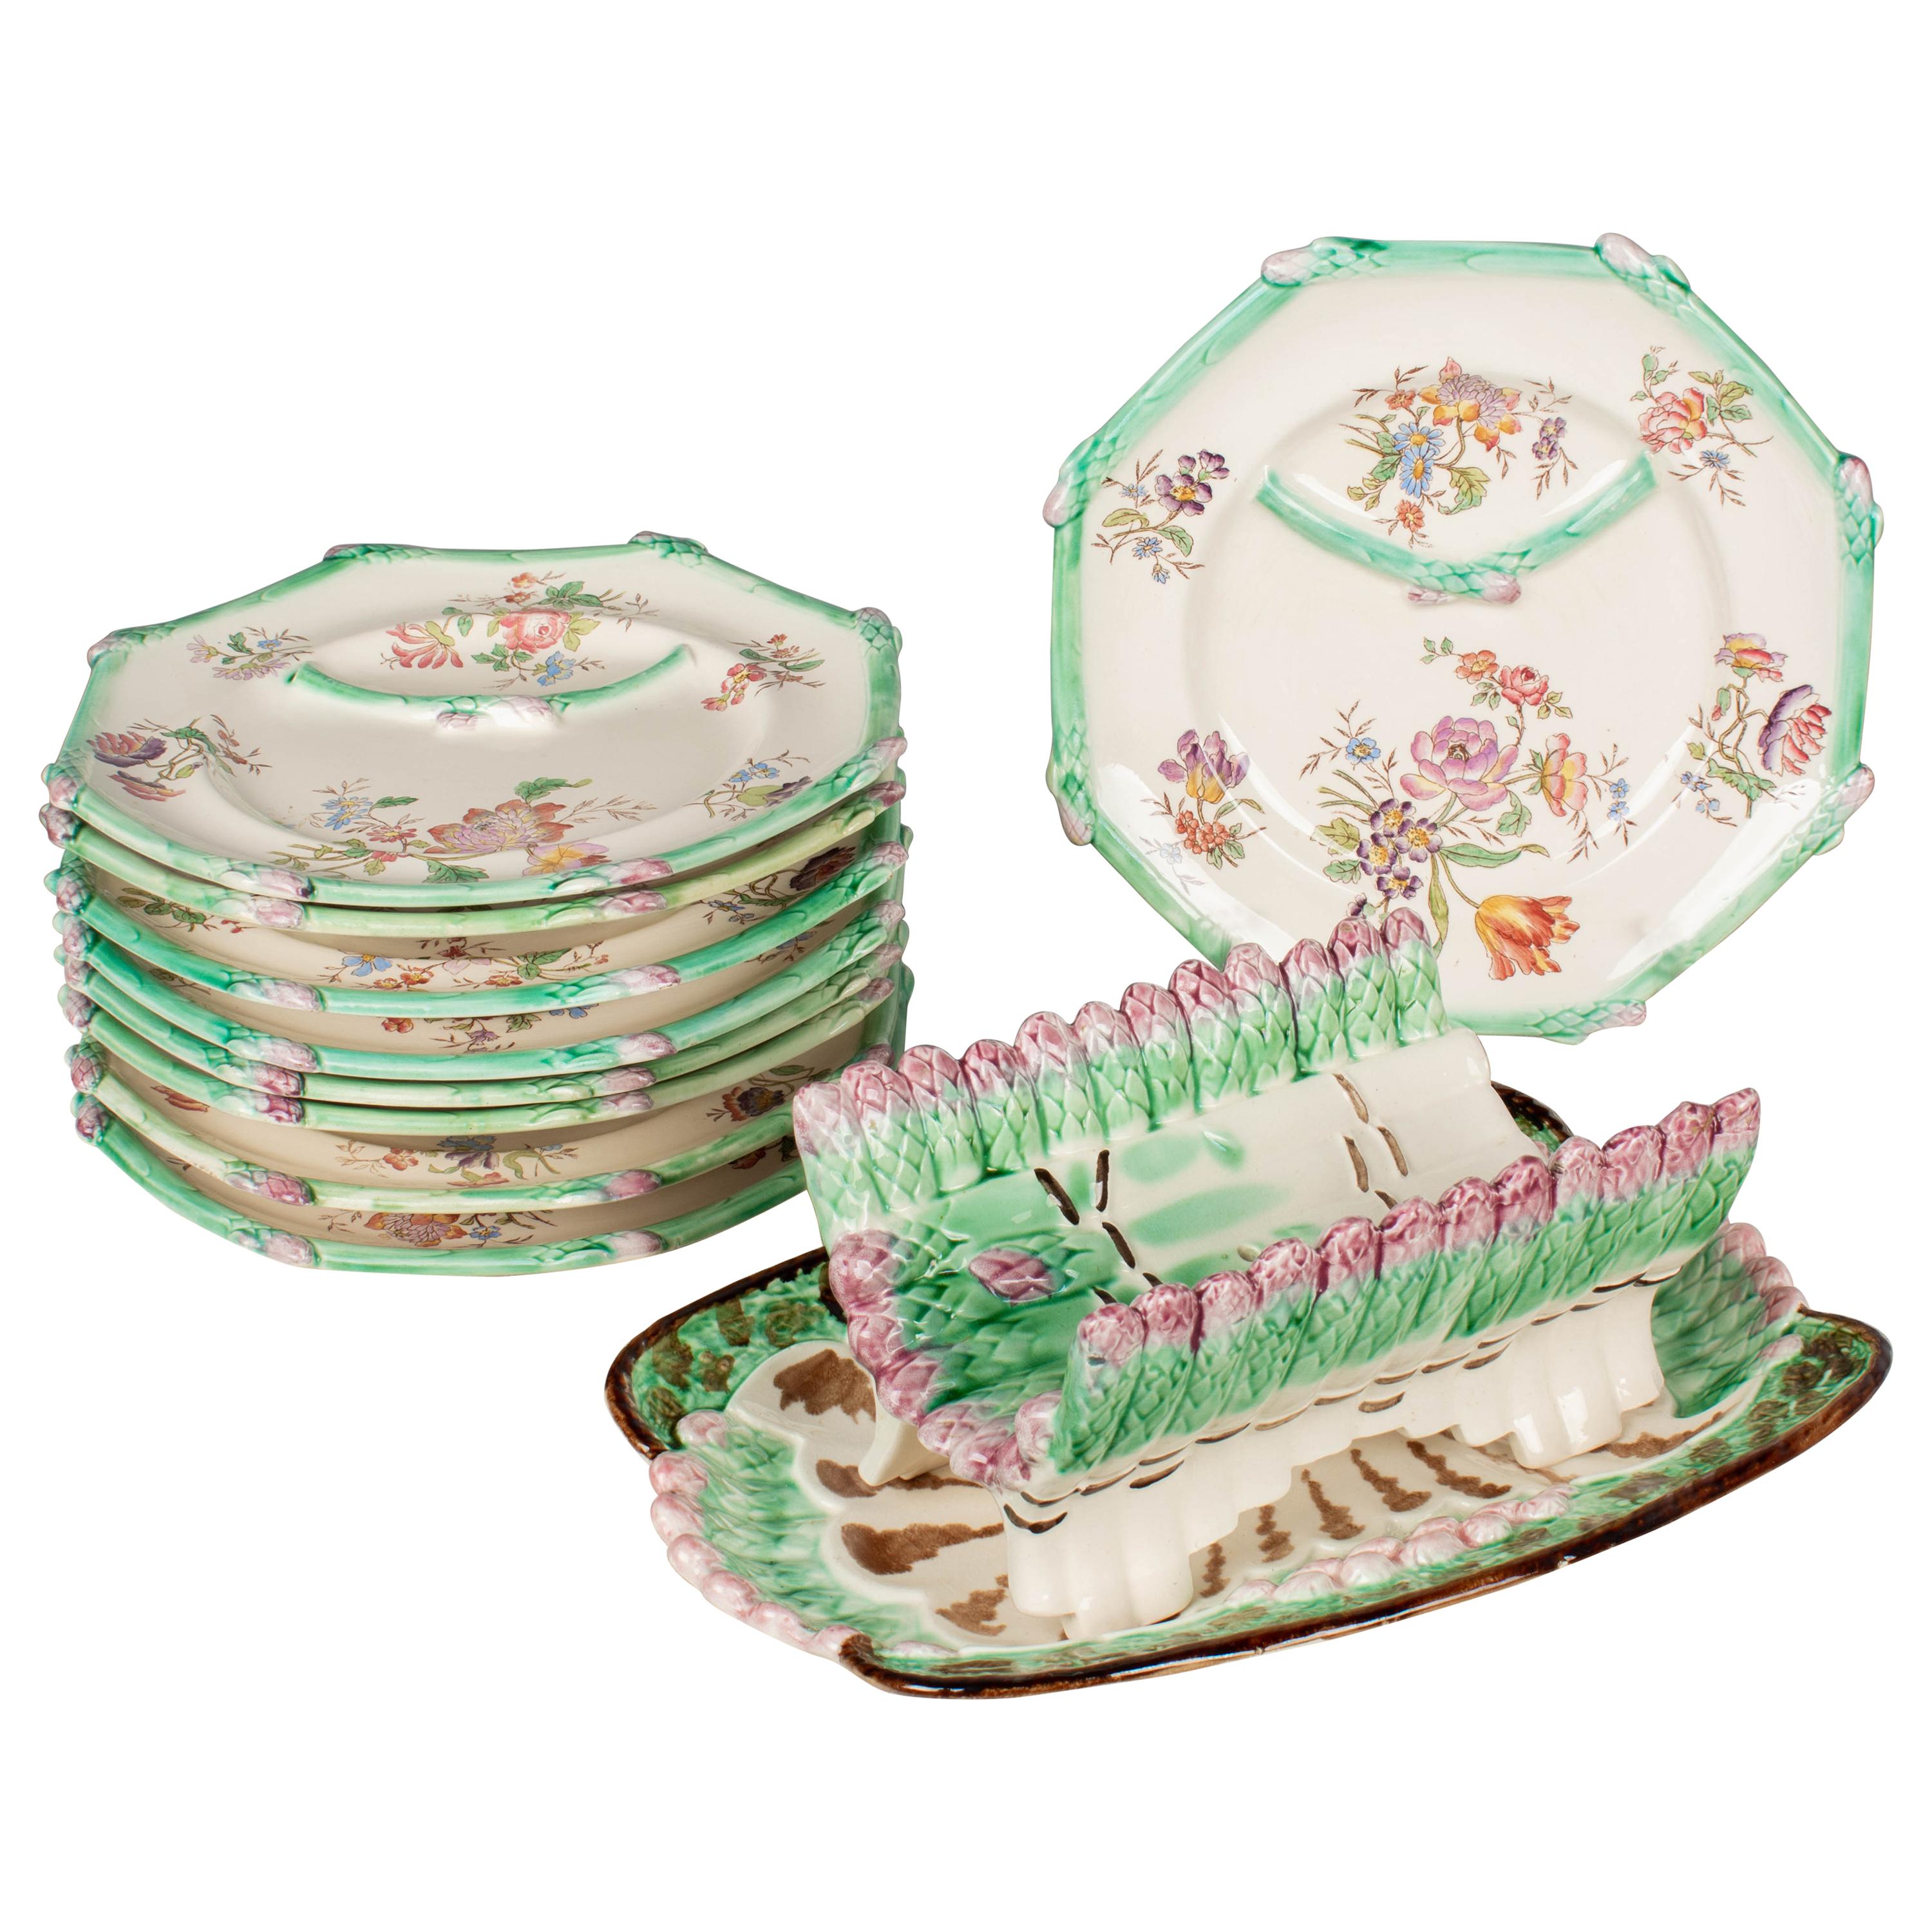 Longchamp French Majolica Asparagus 10 Plates and Serving Set